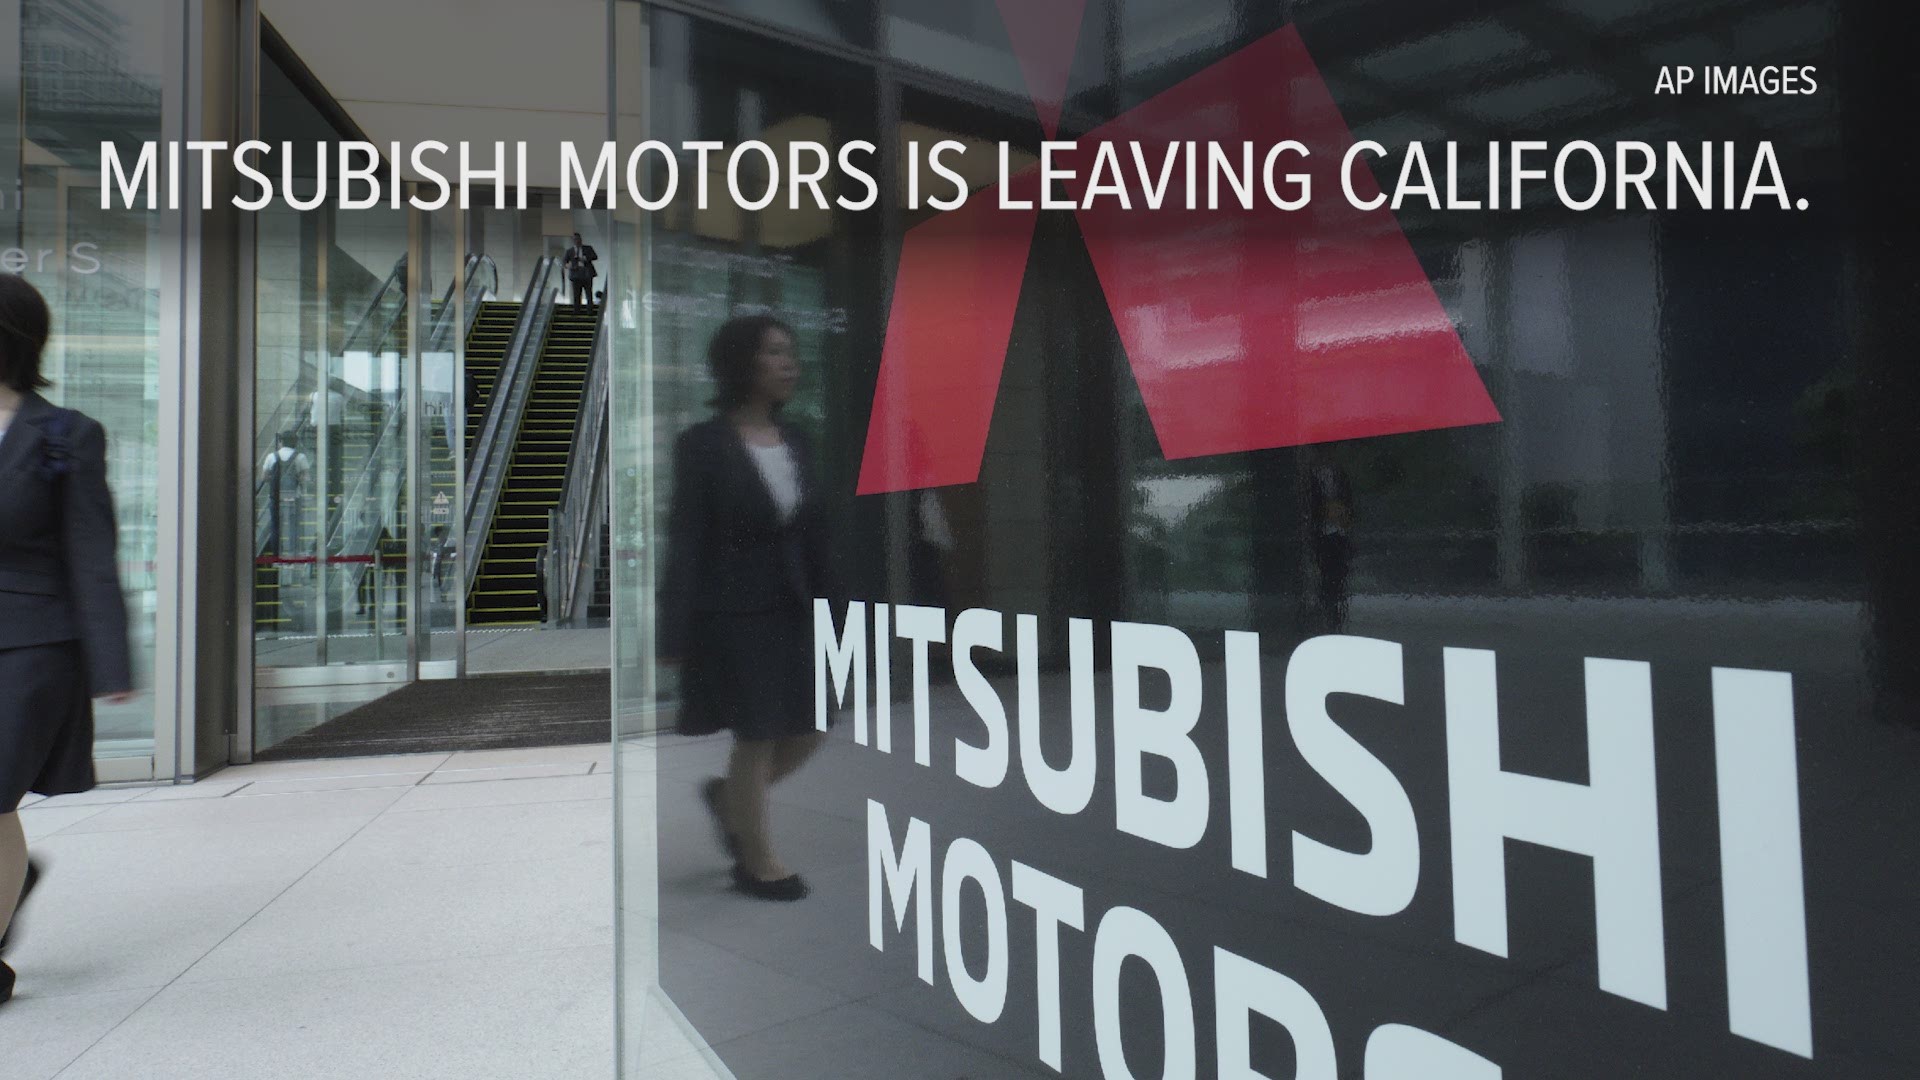 Mitsubishi is leaving California after over 30 years. It's been the North American headquarters since 1988.